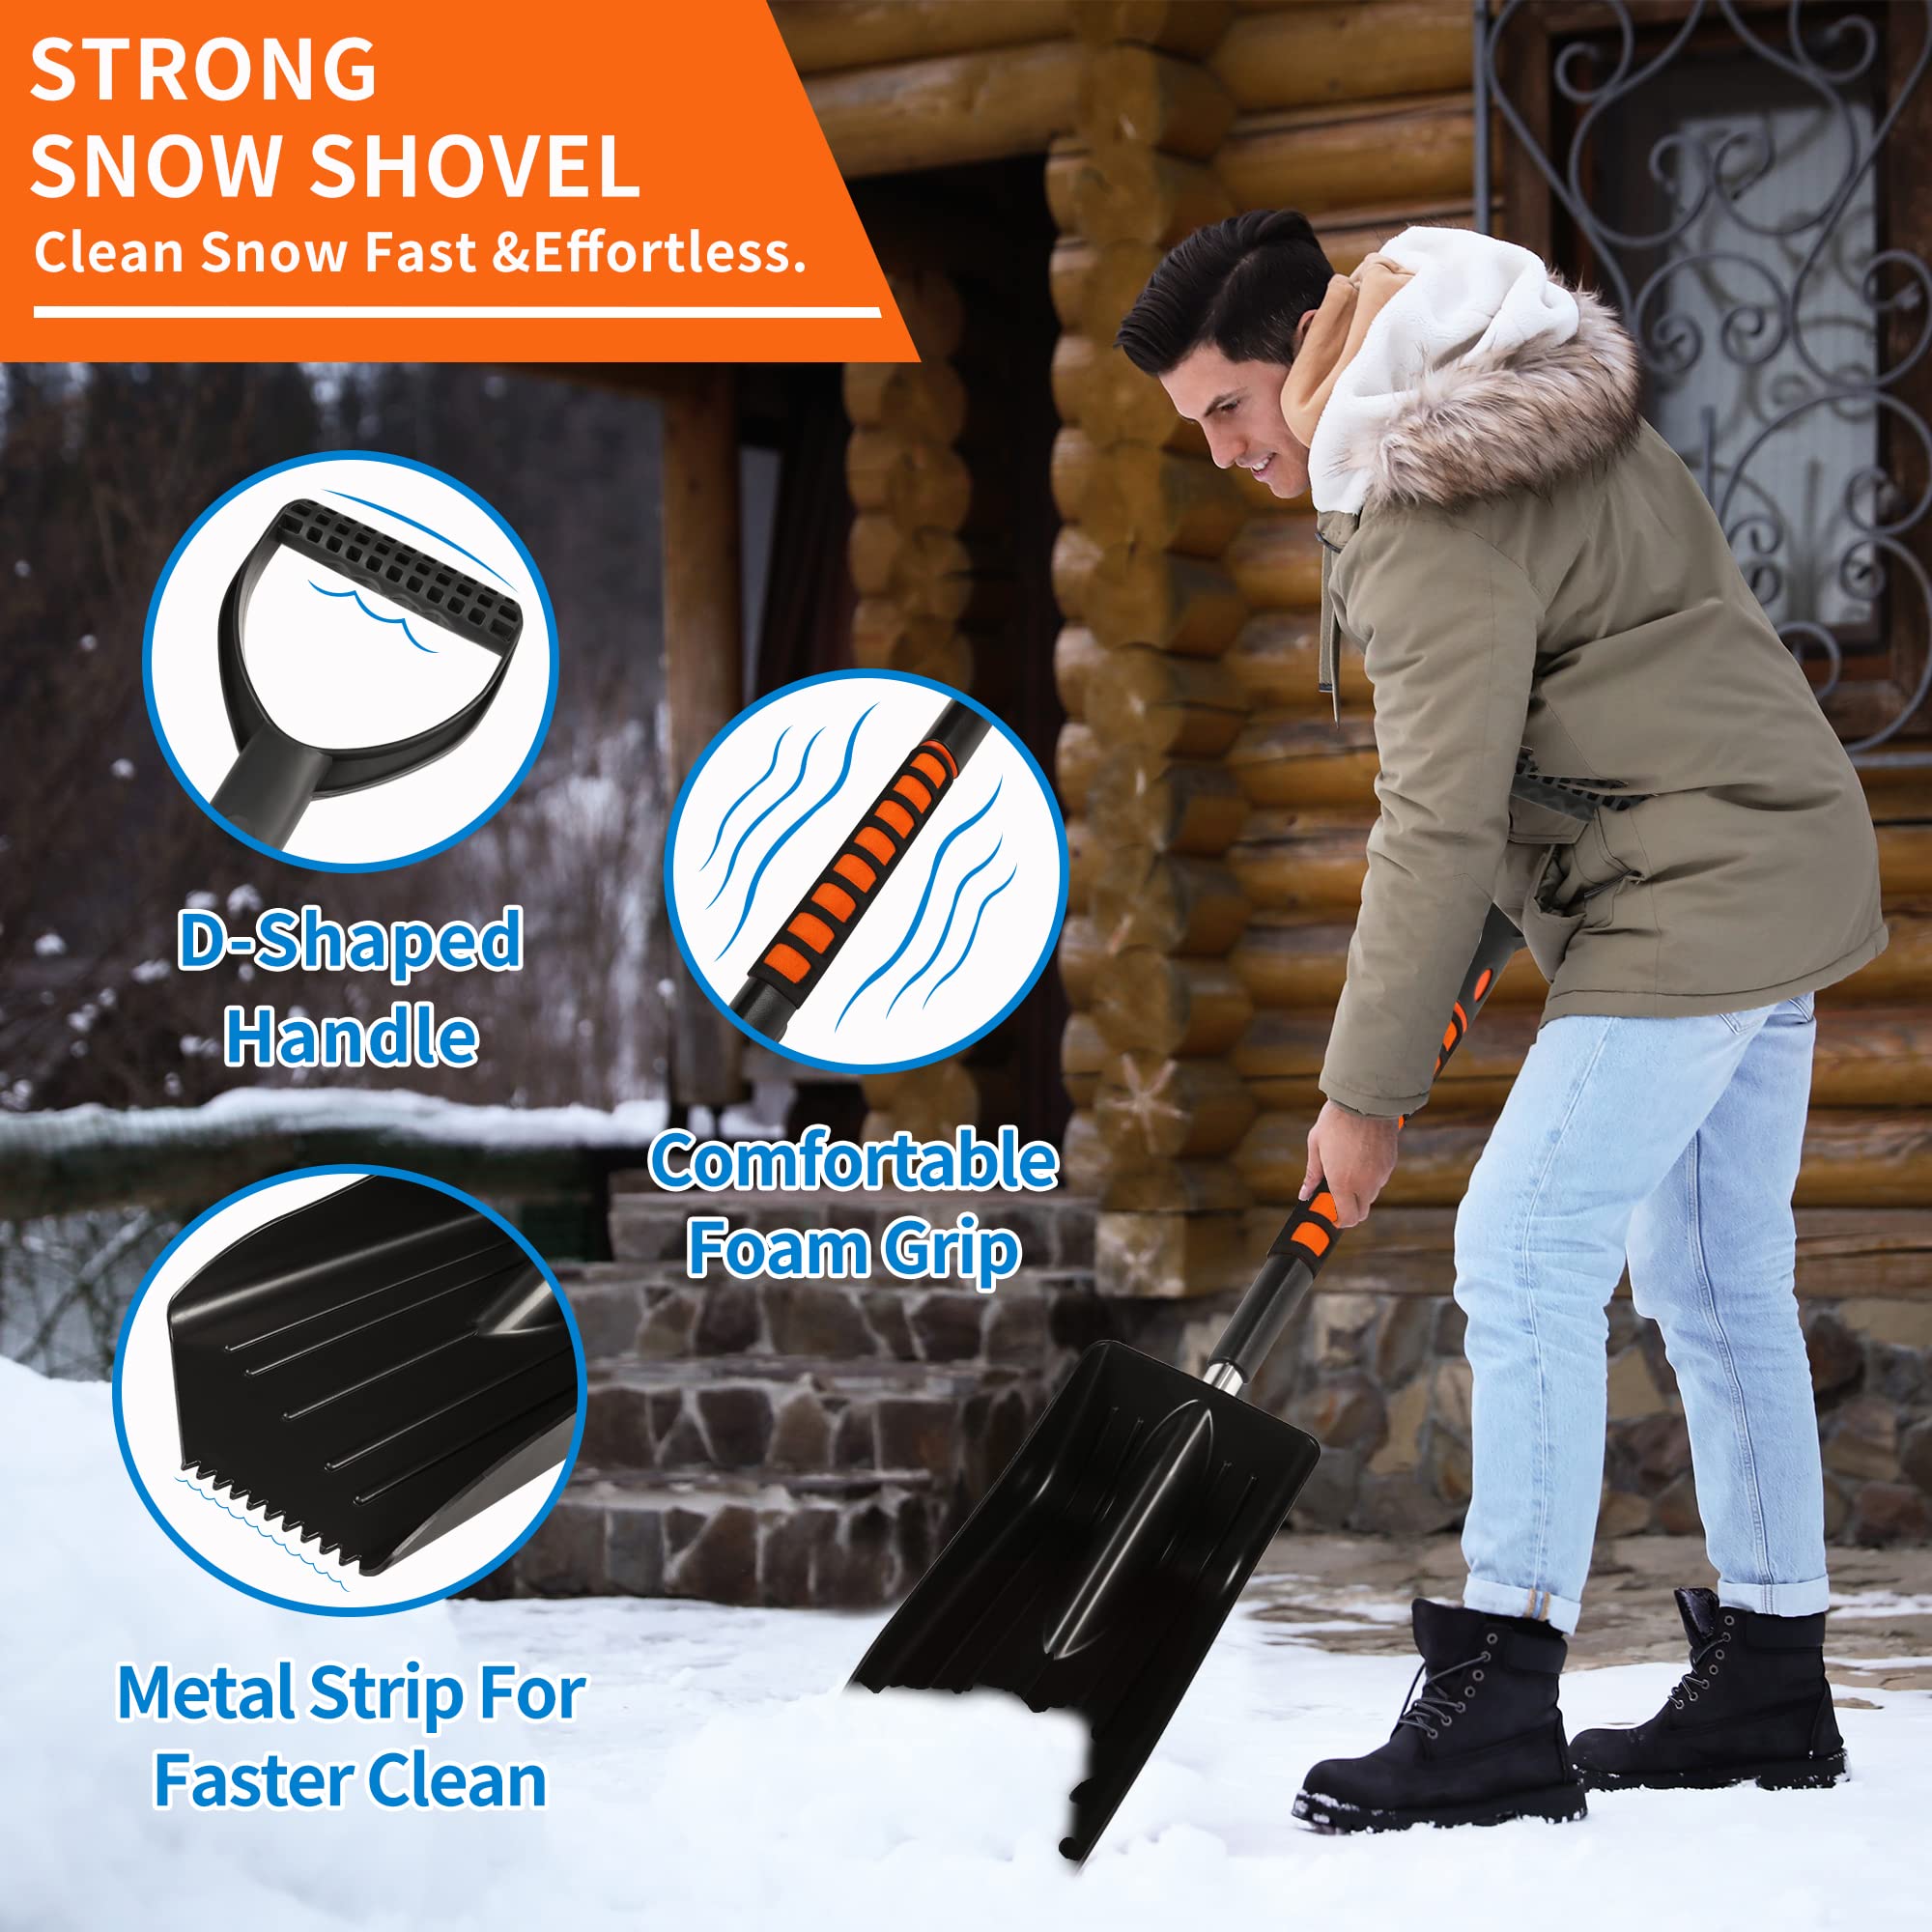 Tapha 36-Inch Squeegee Snow Brush Ice Scraper and Snow Shovel Kit for Car Snow Ice Removal, 3-in-1 Ergonomic Extendable and Detachable Snow Removal Winter Accessories Kit for SUV, Car, Truck